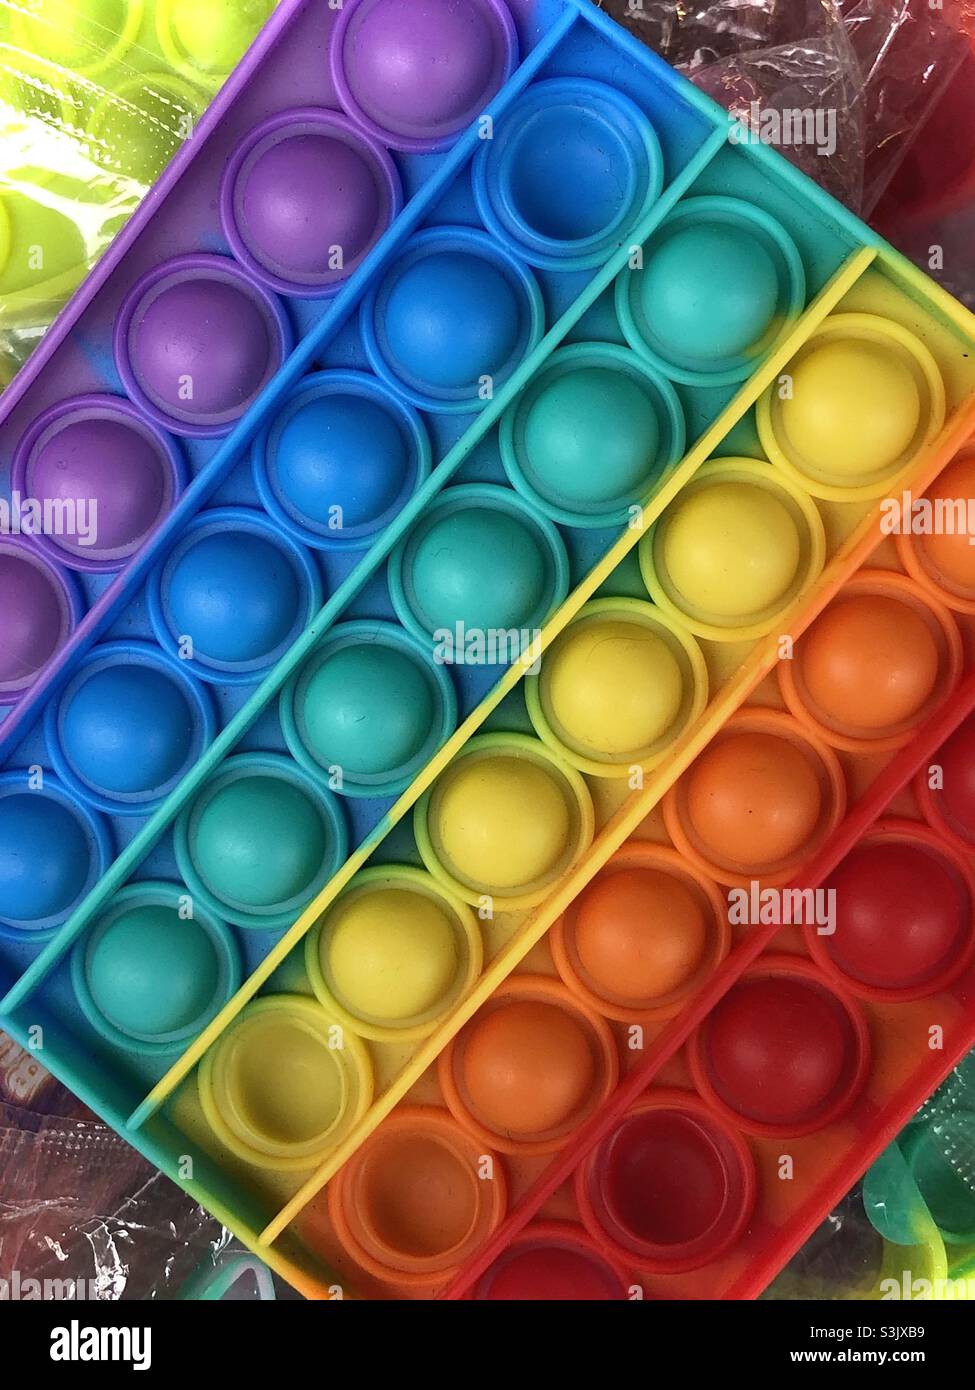 Rainbow colours on a plastic toy Stock Photo